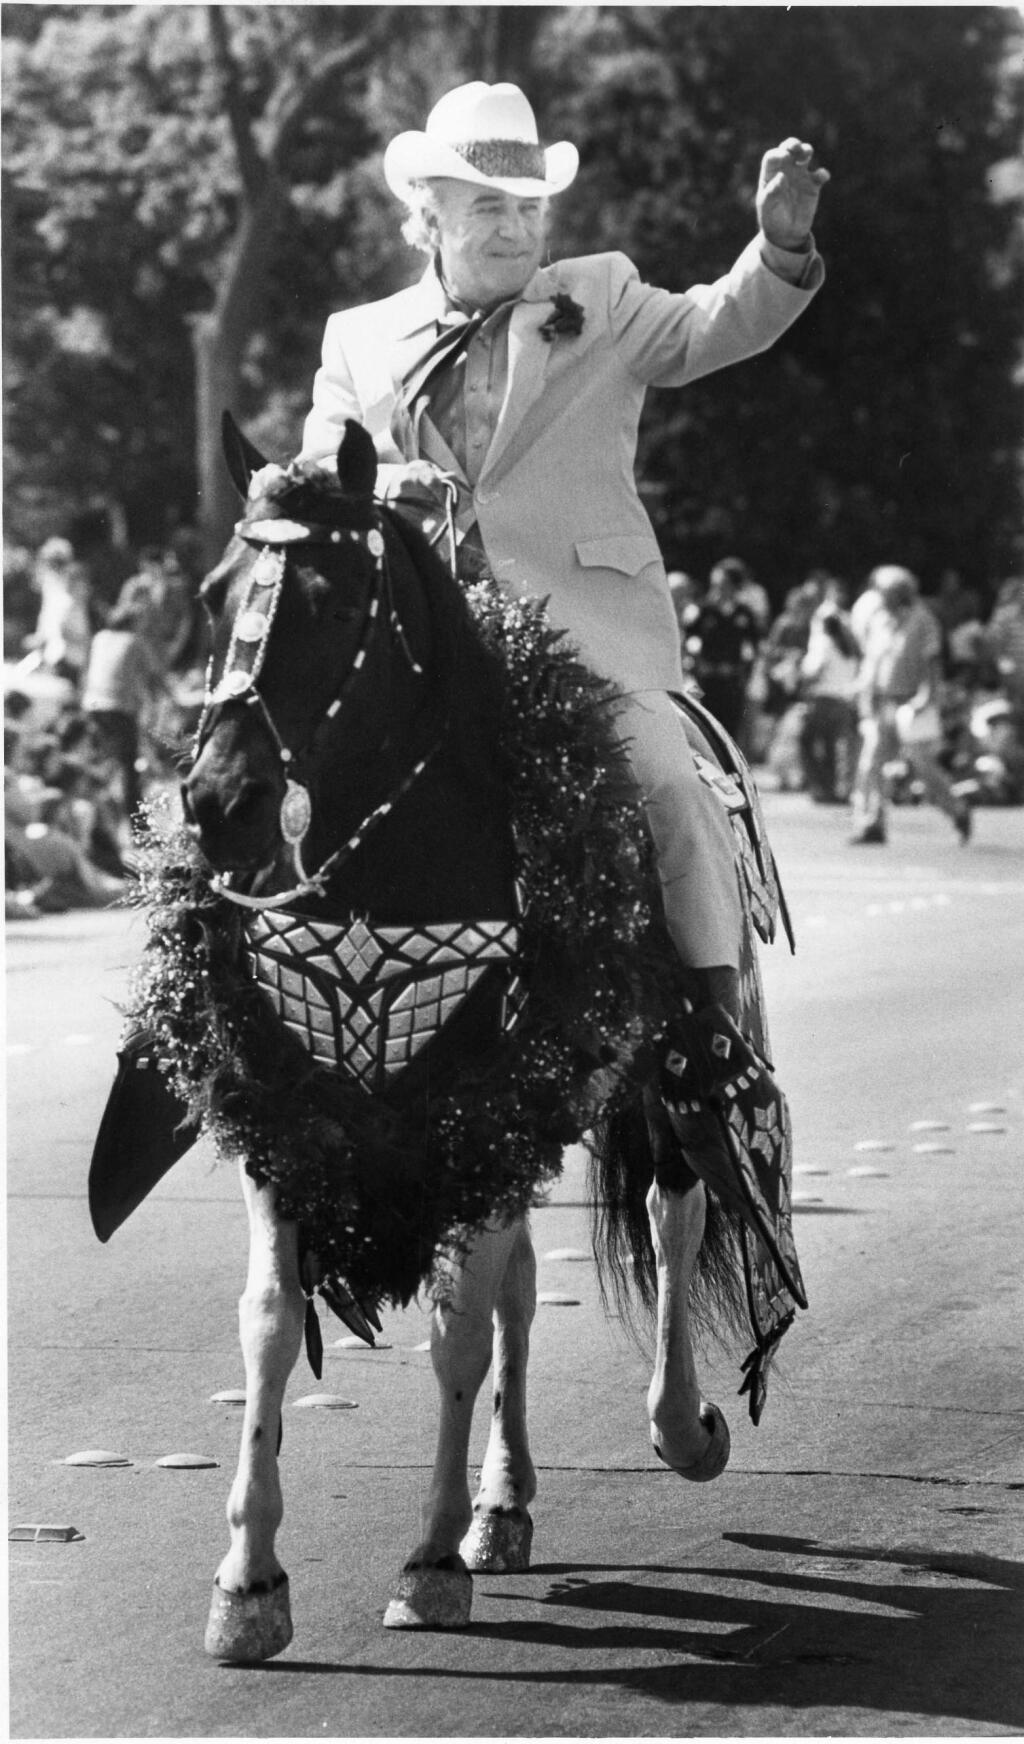 Henry Trione was Grand Marshal of the Rose Parade in 1982. (PD FILE)